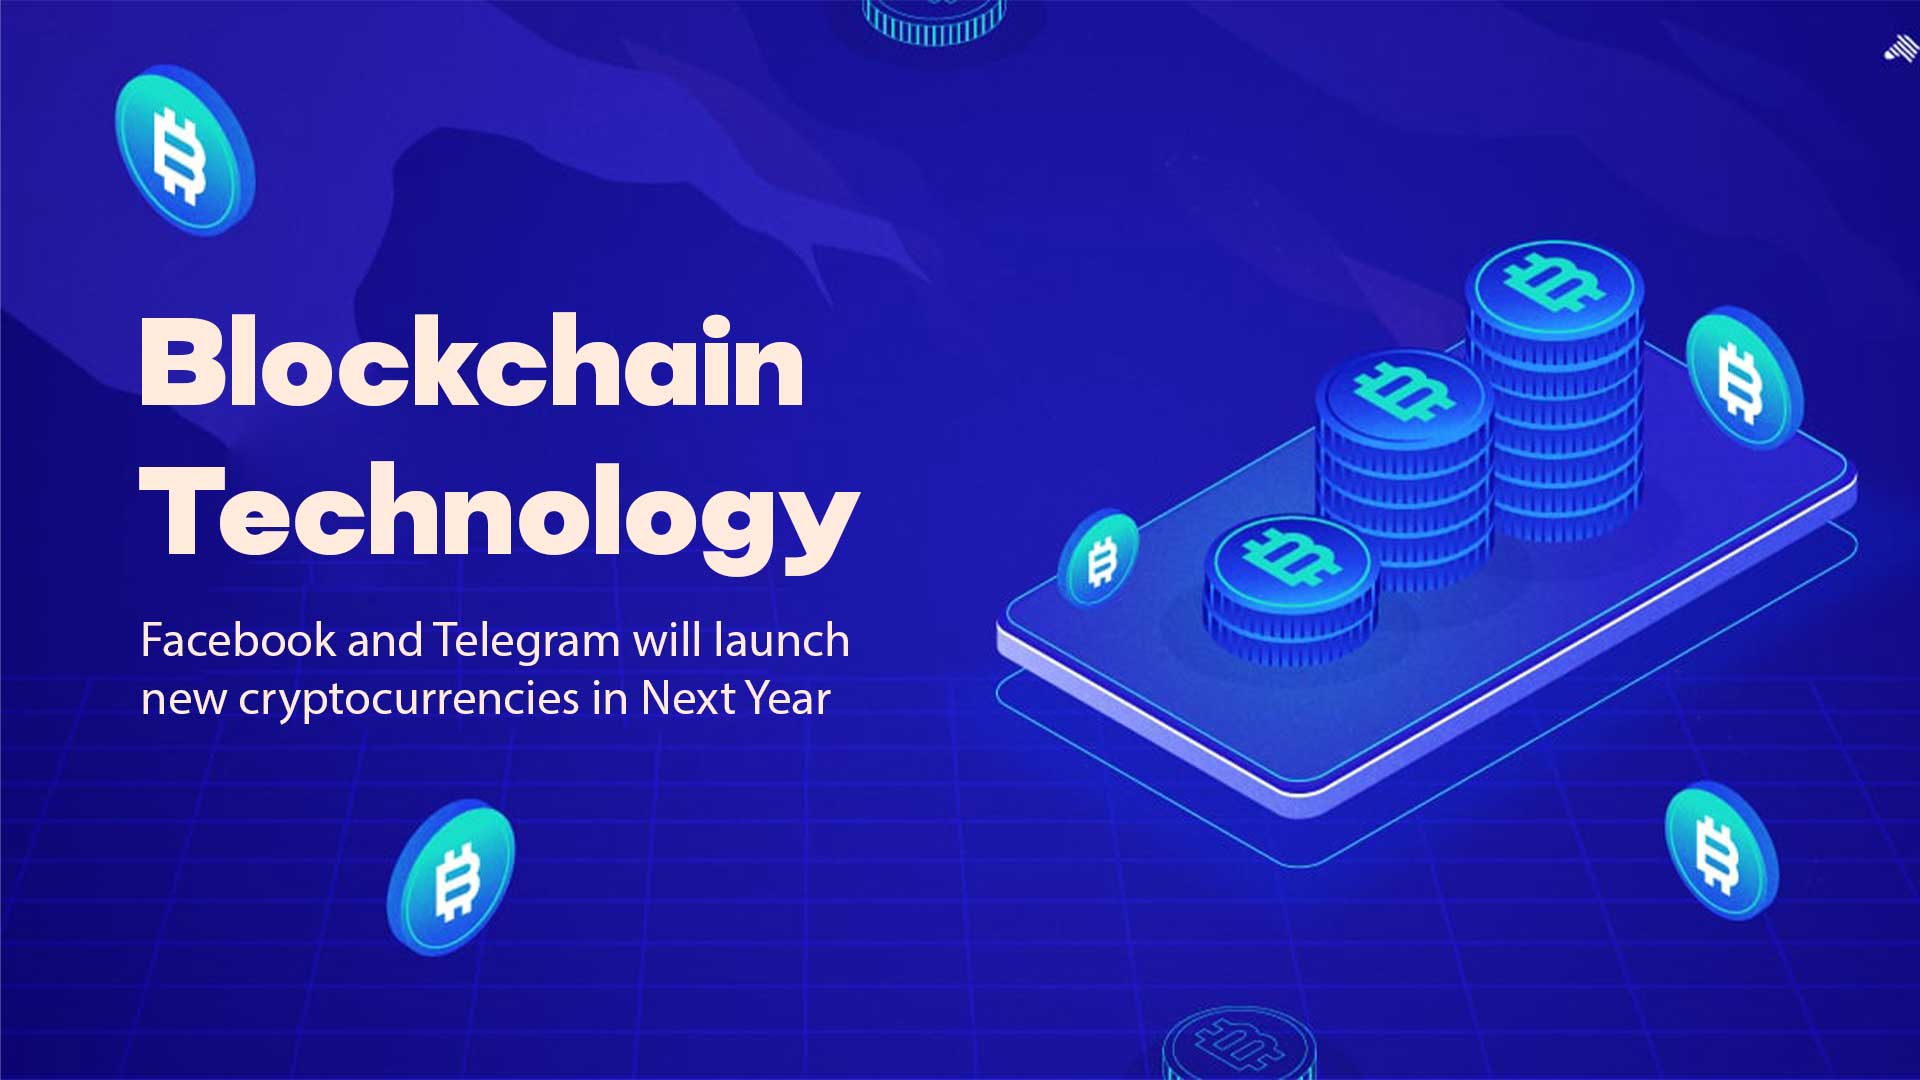 Blockchain Technology: Facebook and Telegram will launch new cryptocurrencies in Next Year 